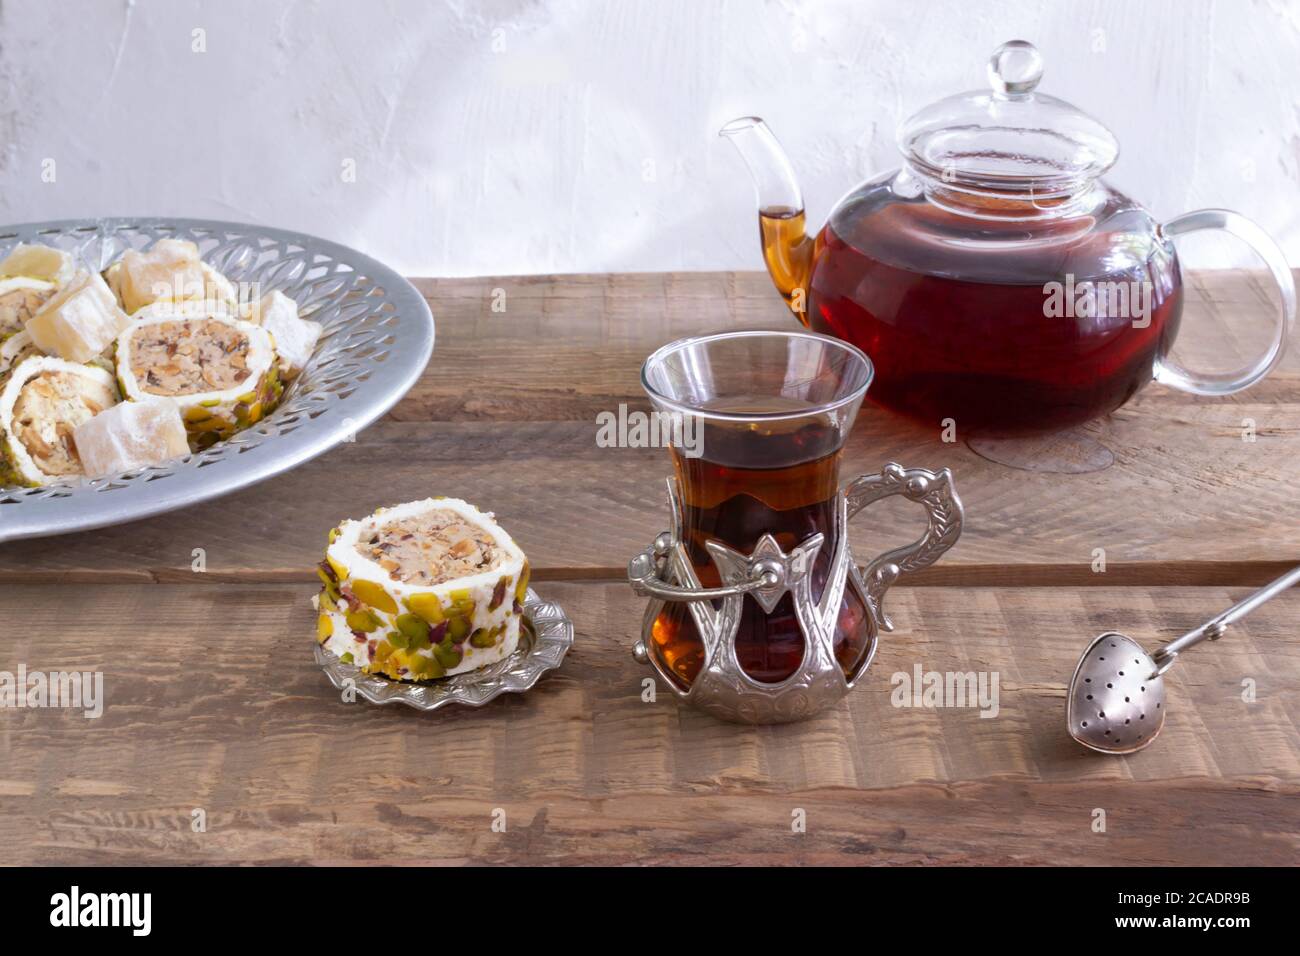 Turkish tea in a traditional cup on a wooden table. Tea drinking with oriental sweets and a fragrant drink. Stock Photo